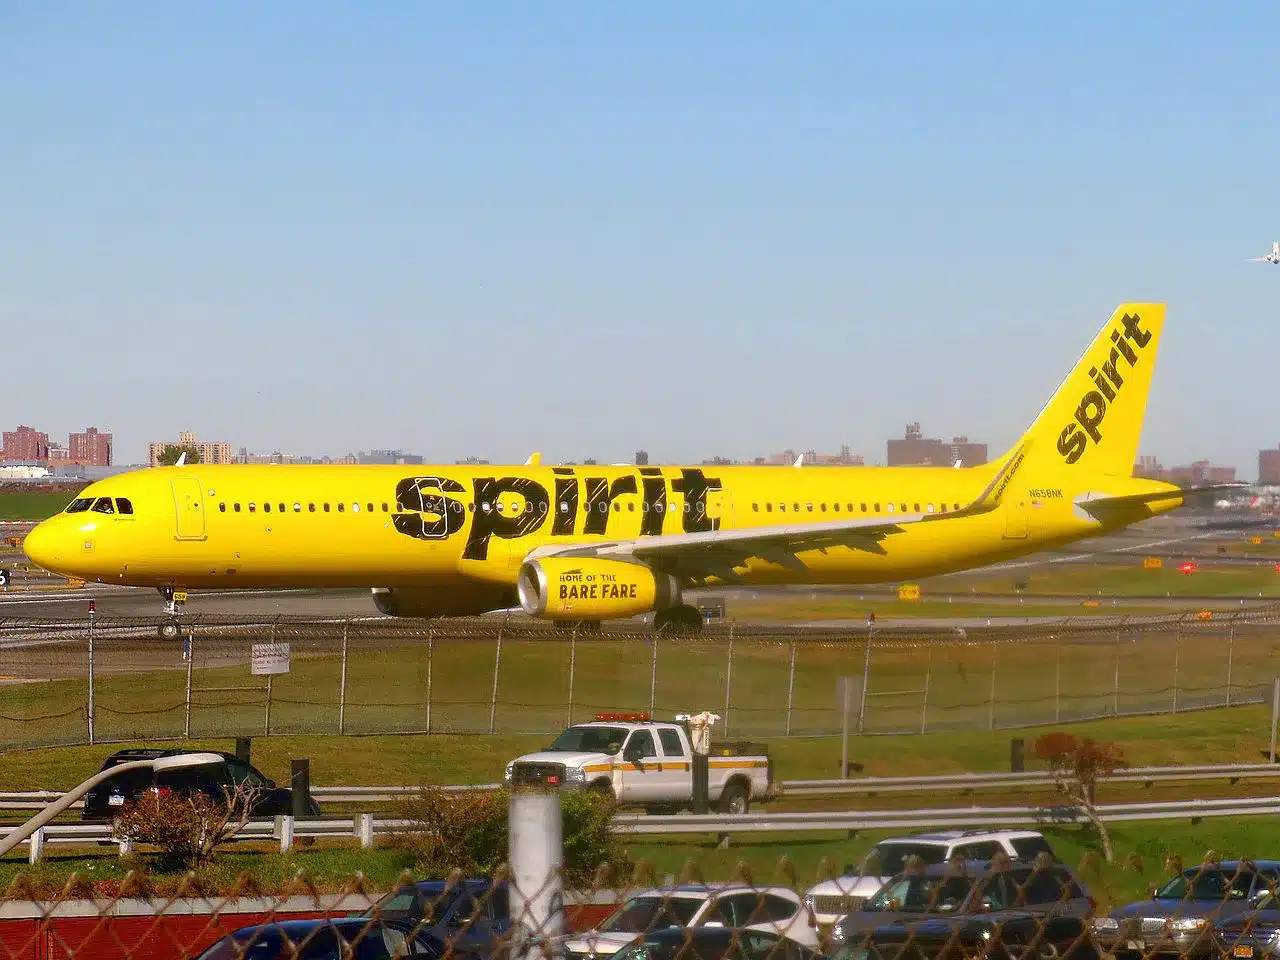 Spirit Airlines Airbus A321 taxiing at LaGuardia Airport in NYC.